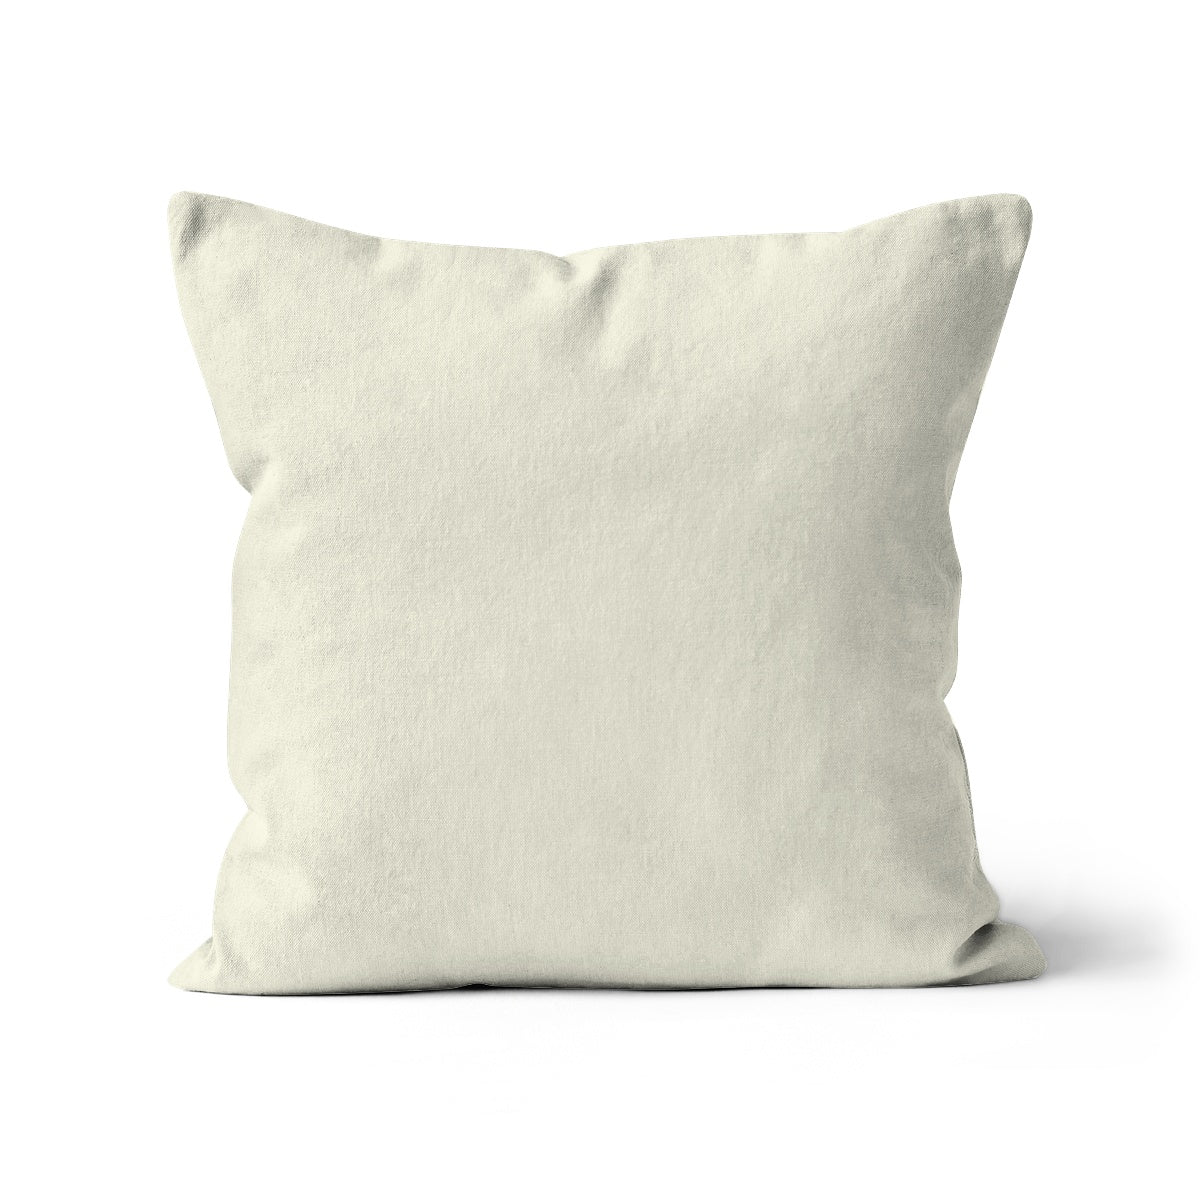 Off-white cotton cushion cover. Cream square scatter cushion cover. Made with organic cotton in the UK. Our sustainable homeware Plain cushion covers are printed with Eco-friendly water-based inks. Removable and machine-washable cushion covers made in the UK using eco-friendly inks., cream coloured cushion cover.